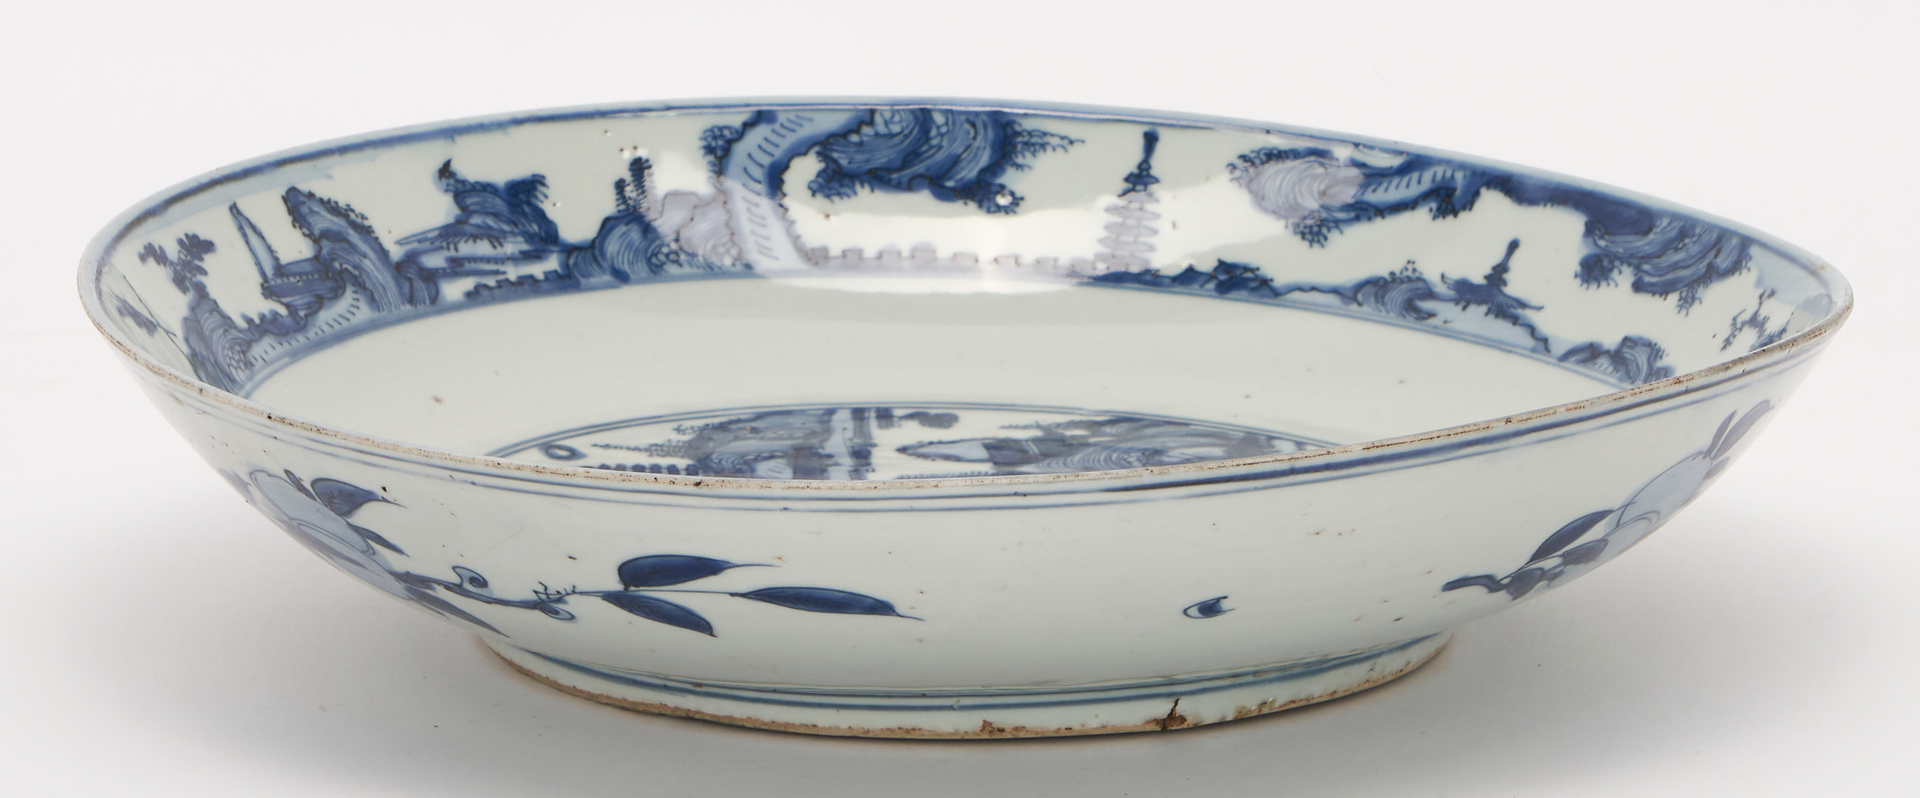 Lot 22: Large Chinese Blue & White Porcelain Charger or Low Bowl